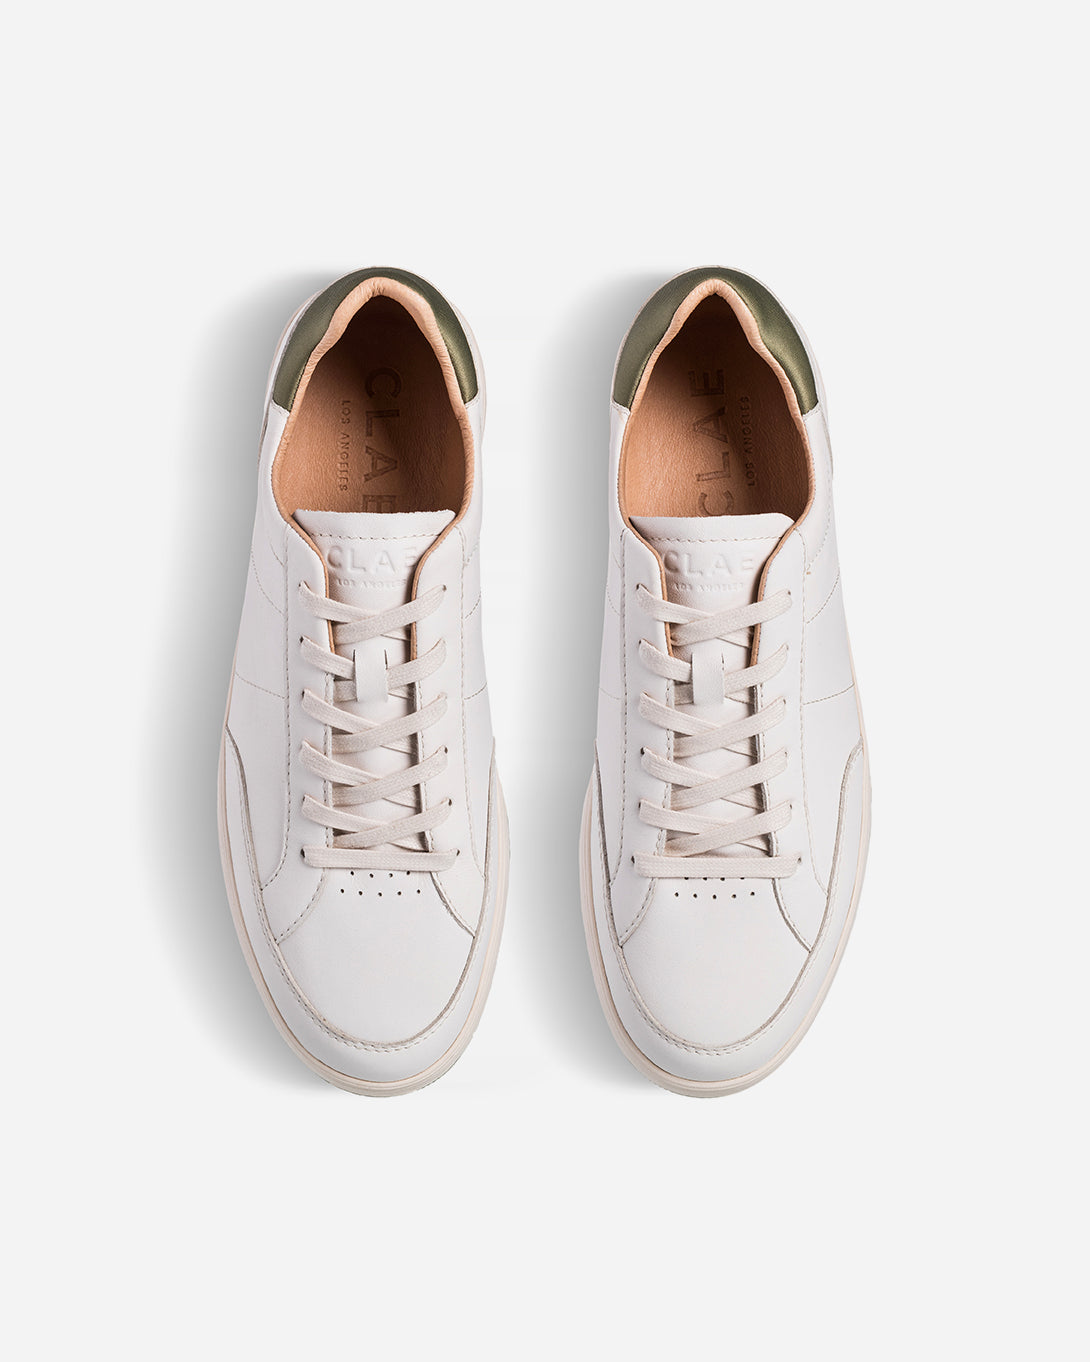 Off White Leather Olive Monroe Clae Tennis Style Shoe